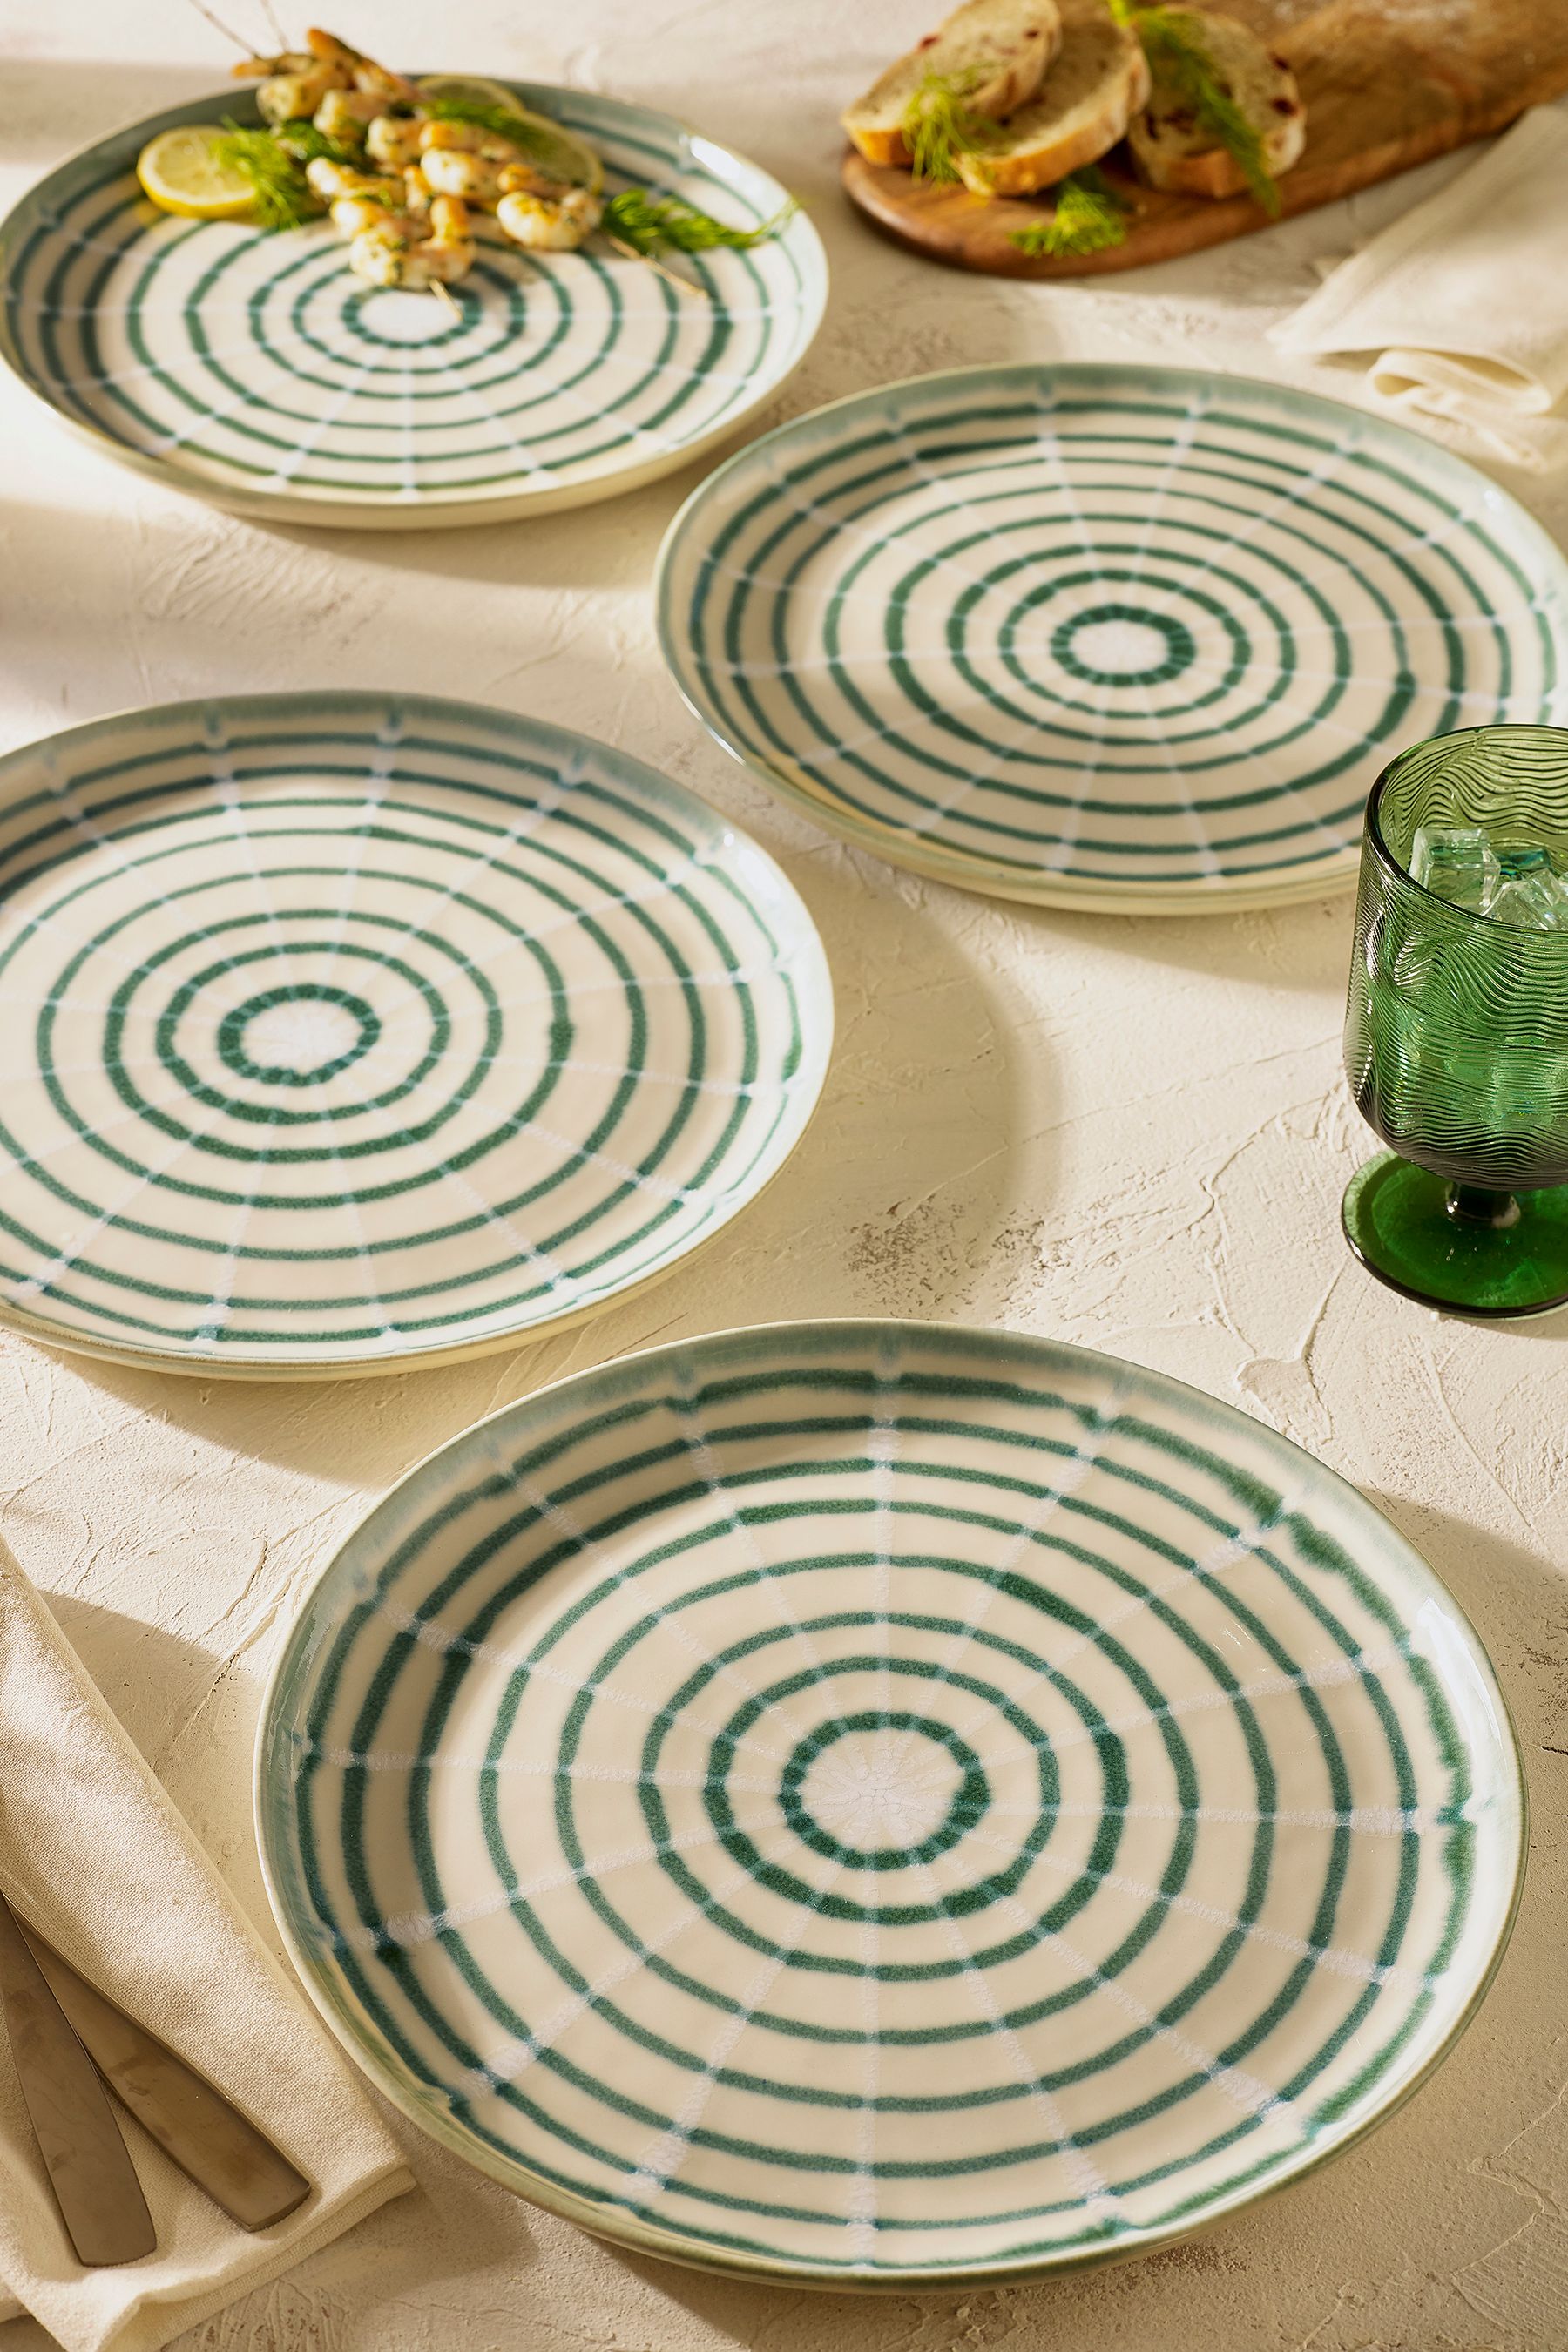 Buy Set of 4 Teal Blue Almeria Dinner Plates from the Next UK online shop